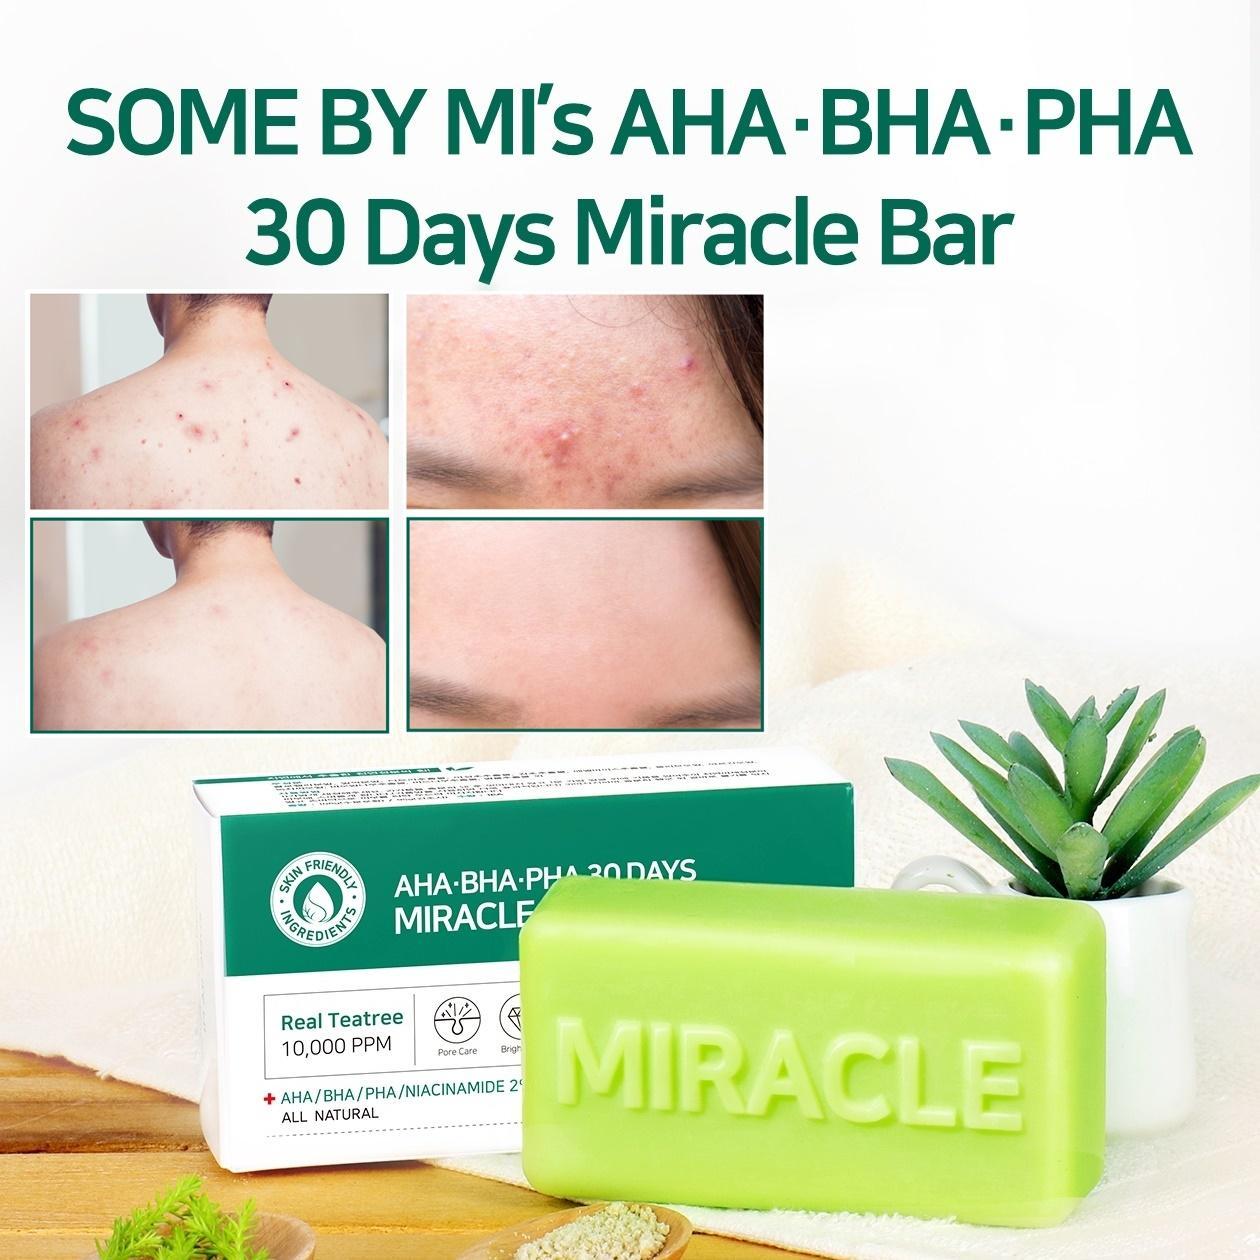 Some By Mi Miracle Cleansing Bar - Korean-Skincare